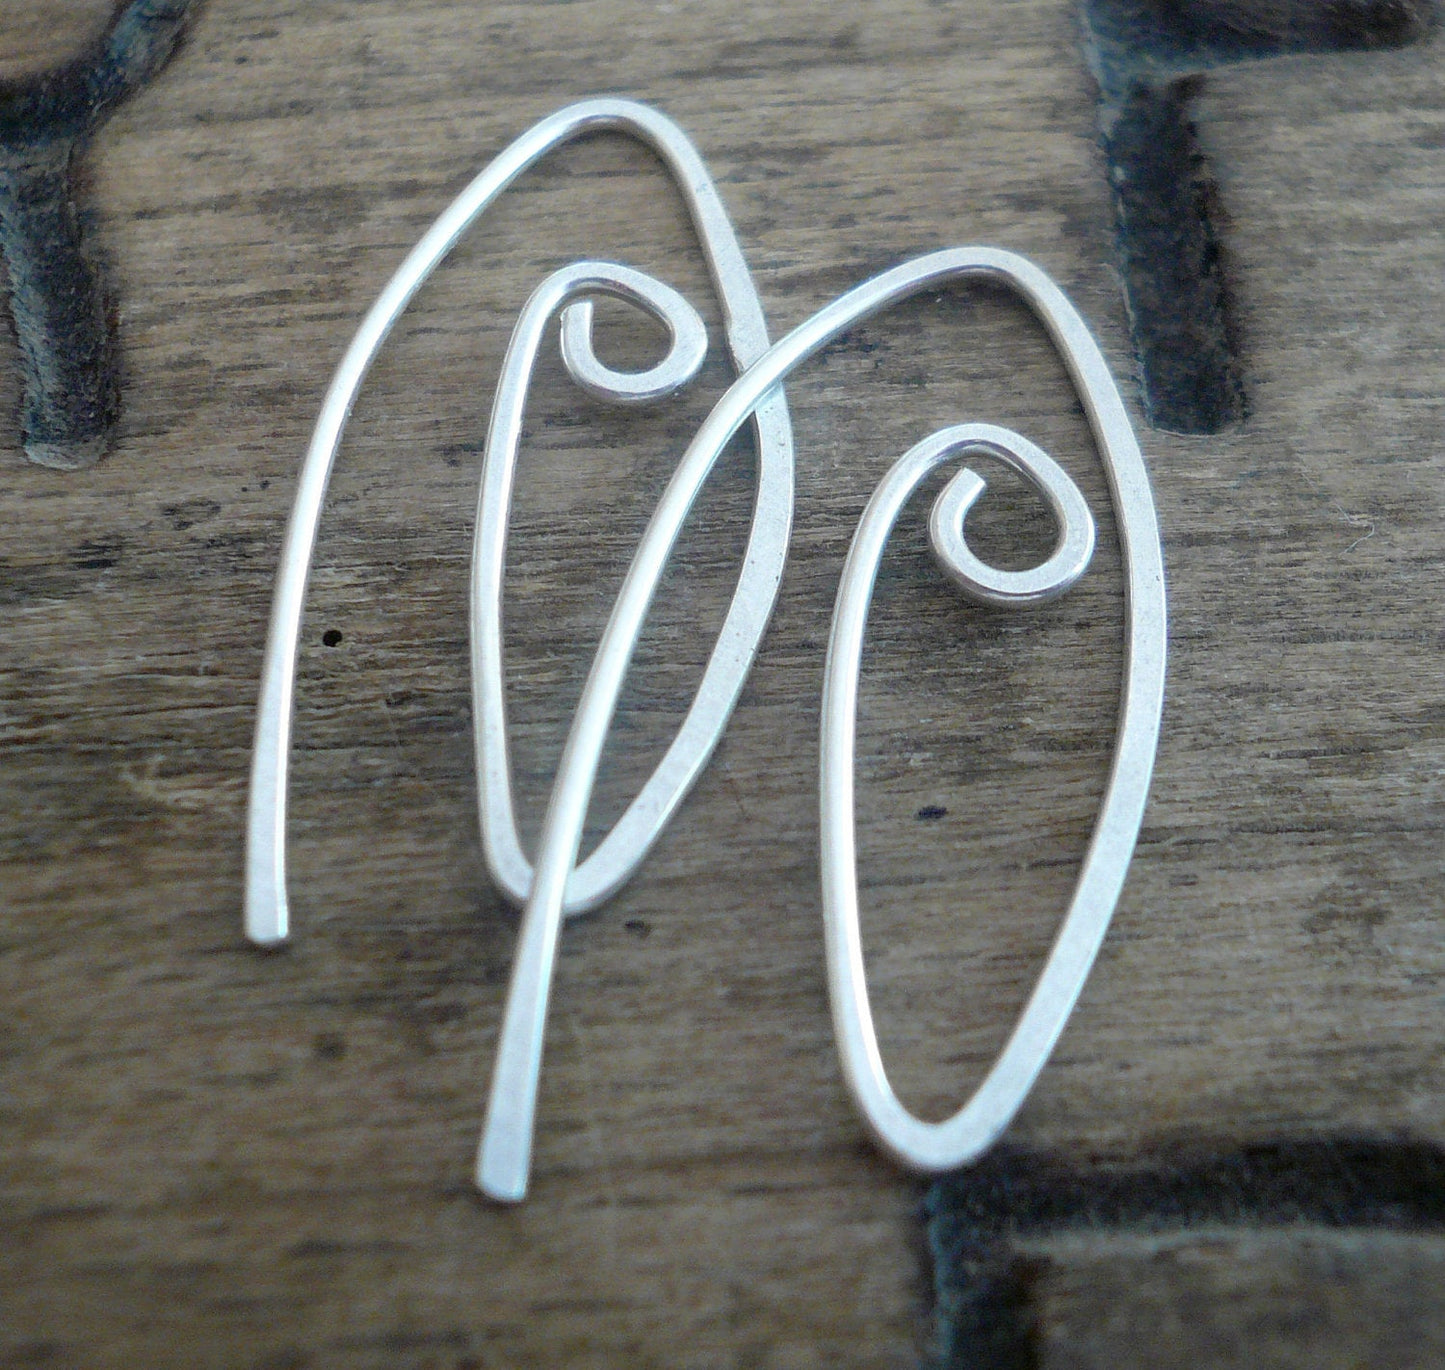 12 Pairs of my Furl Sterling Silver Earwires - Handmade. Handforged